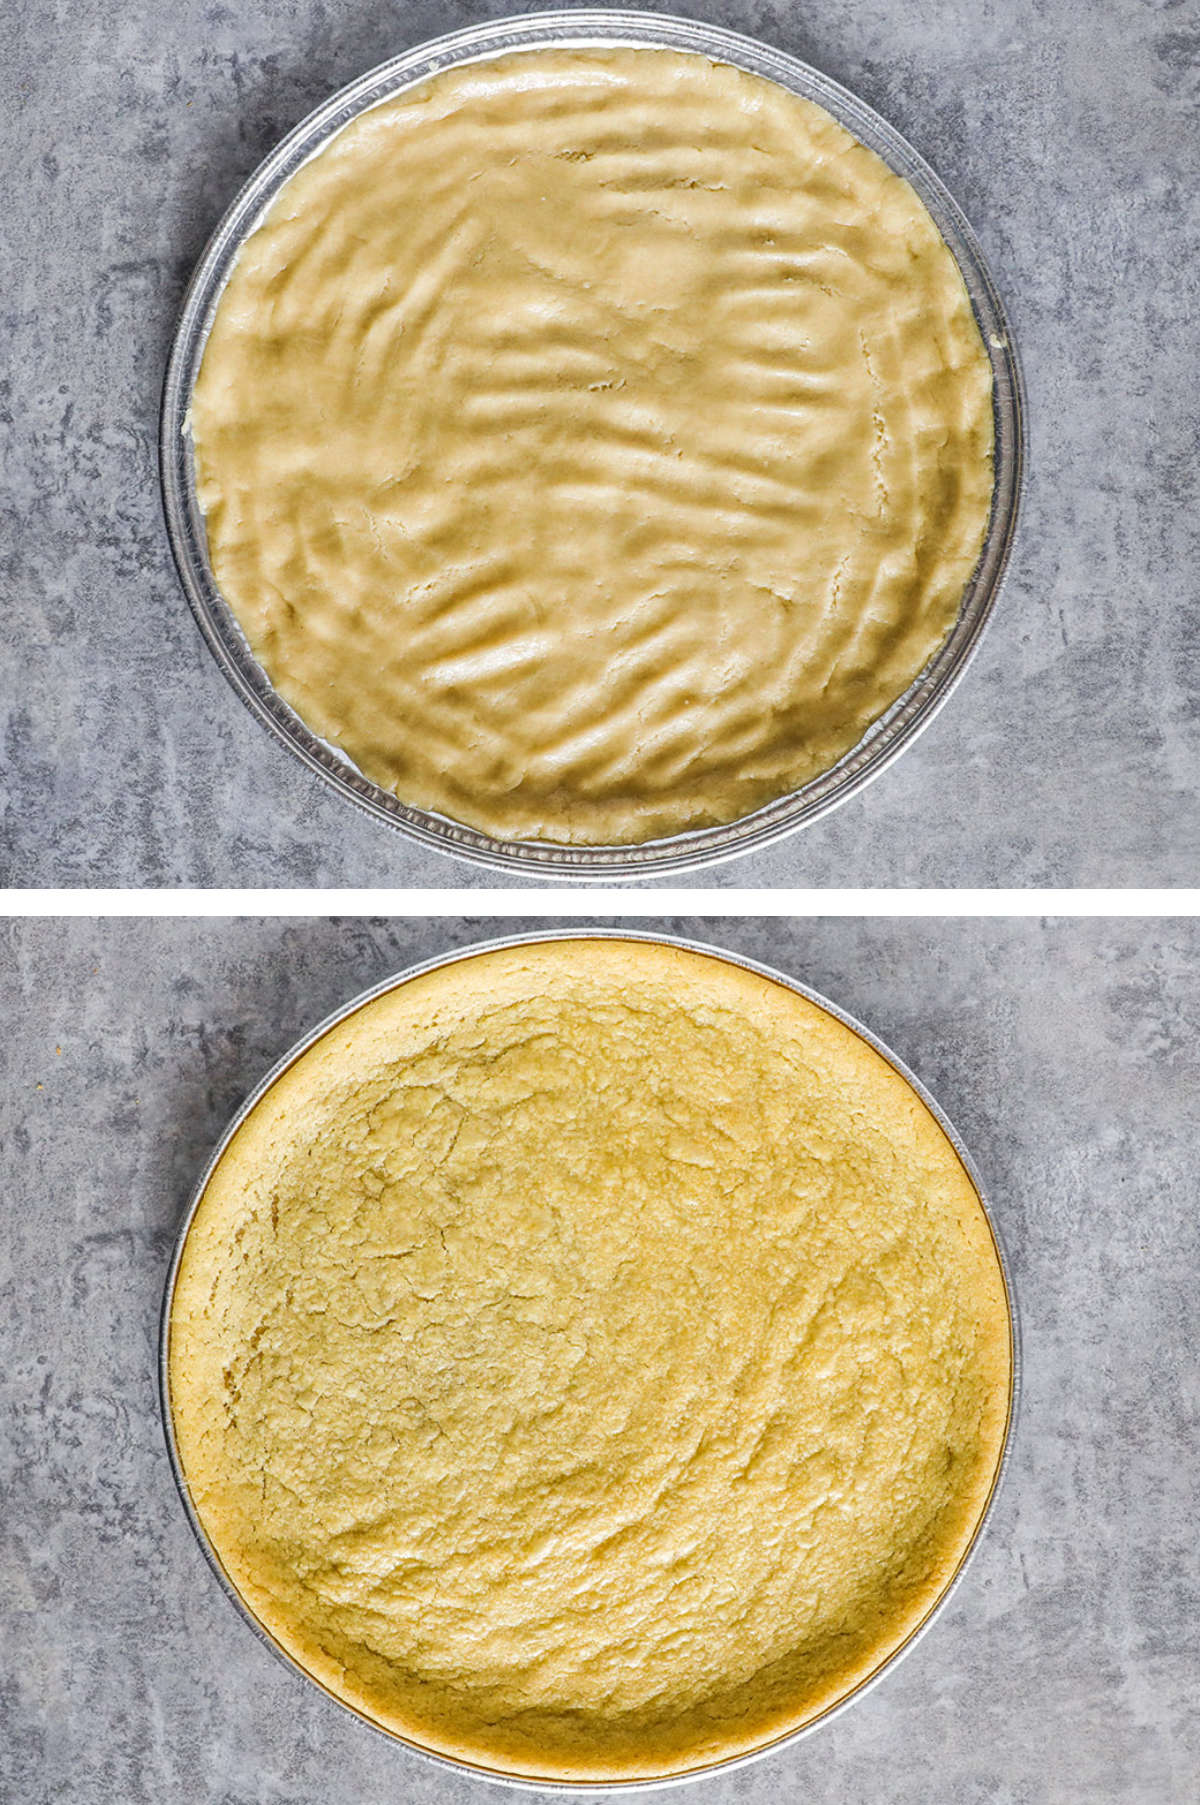 Two overhead images in one: 1. Cookie dough pressed into even layer in sheet. 2. Cooked cookie dough.